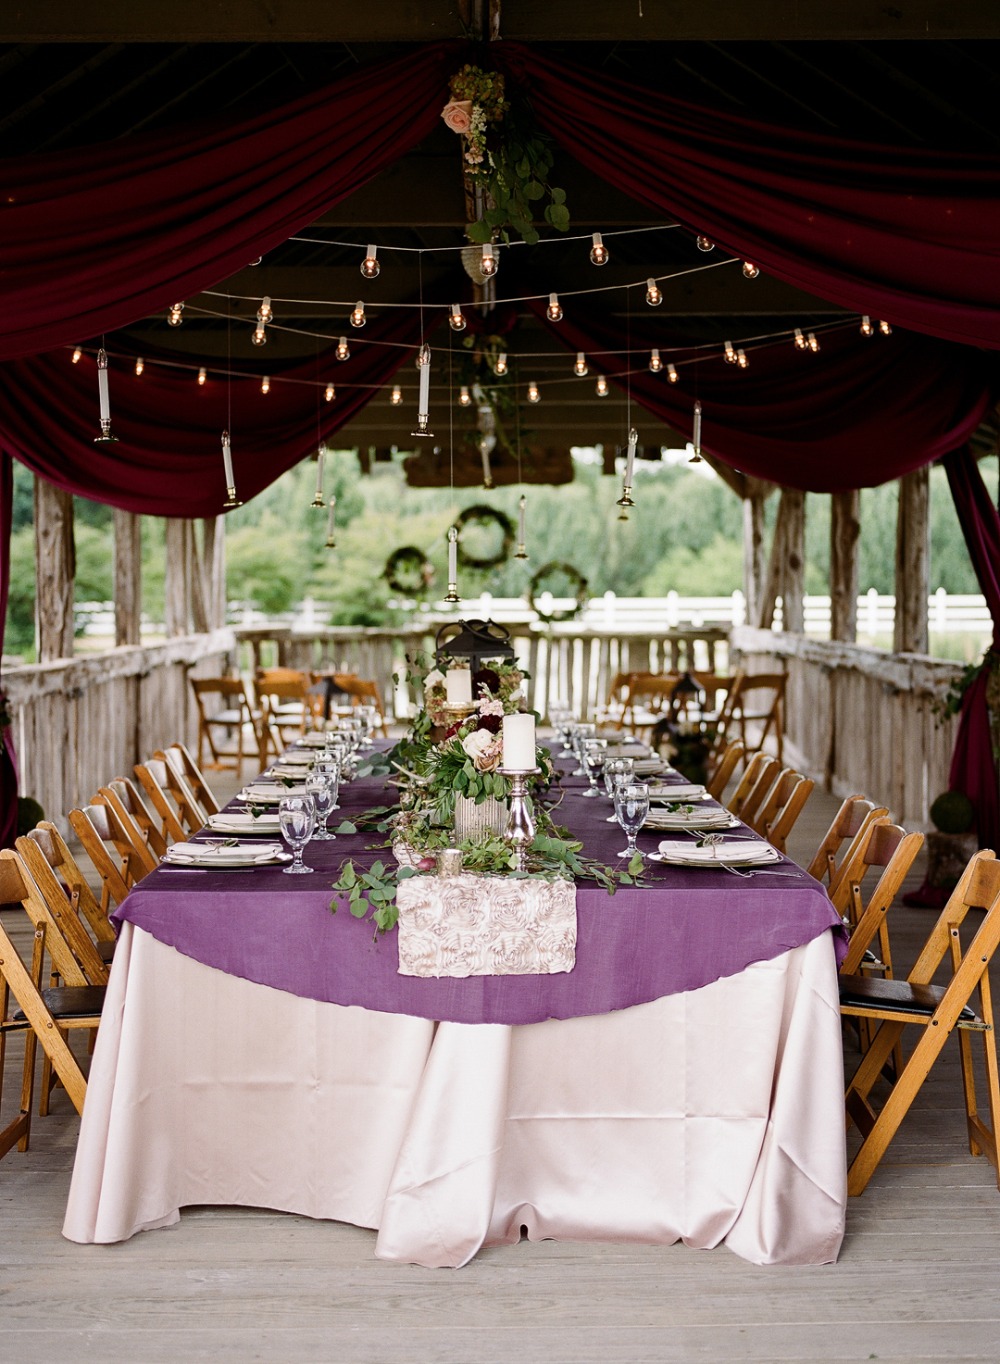 Elegant purple and maroon reception with hanging candles